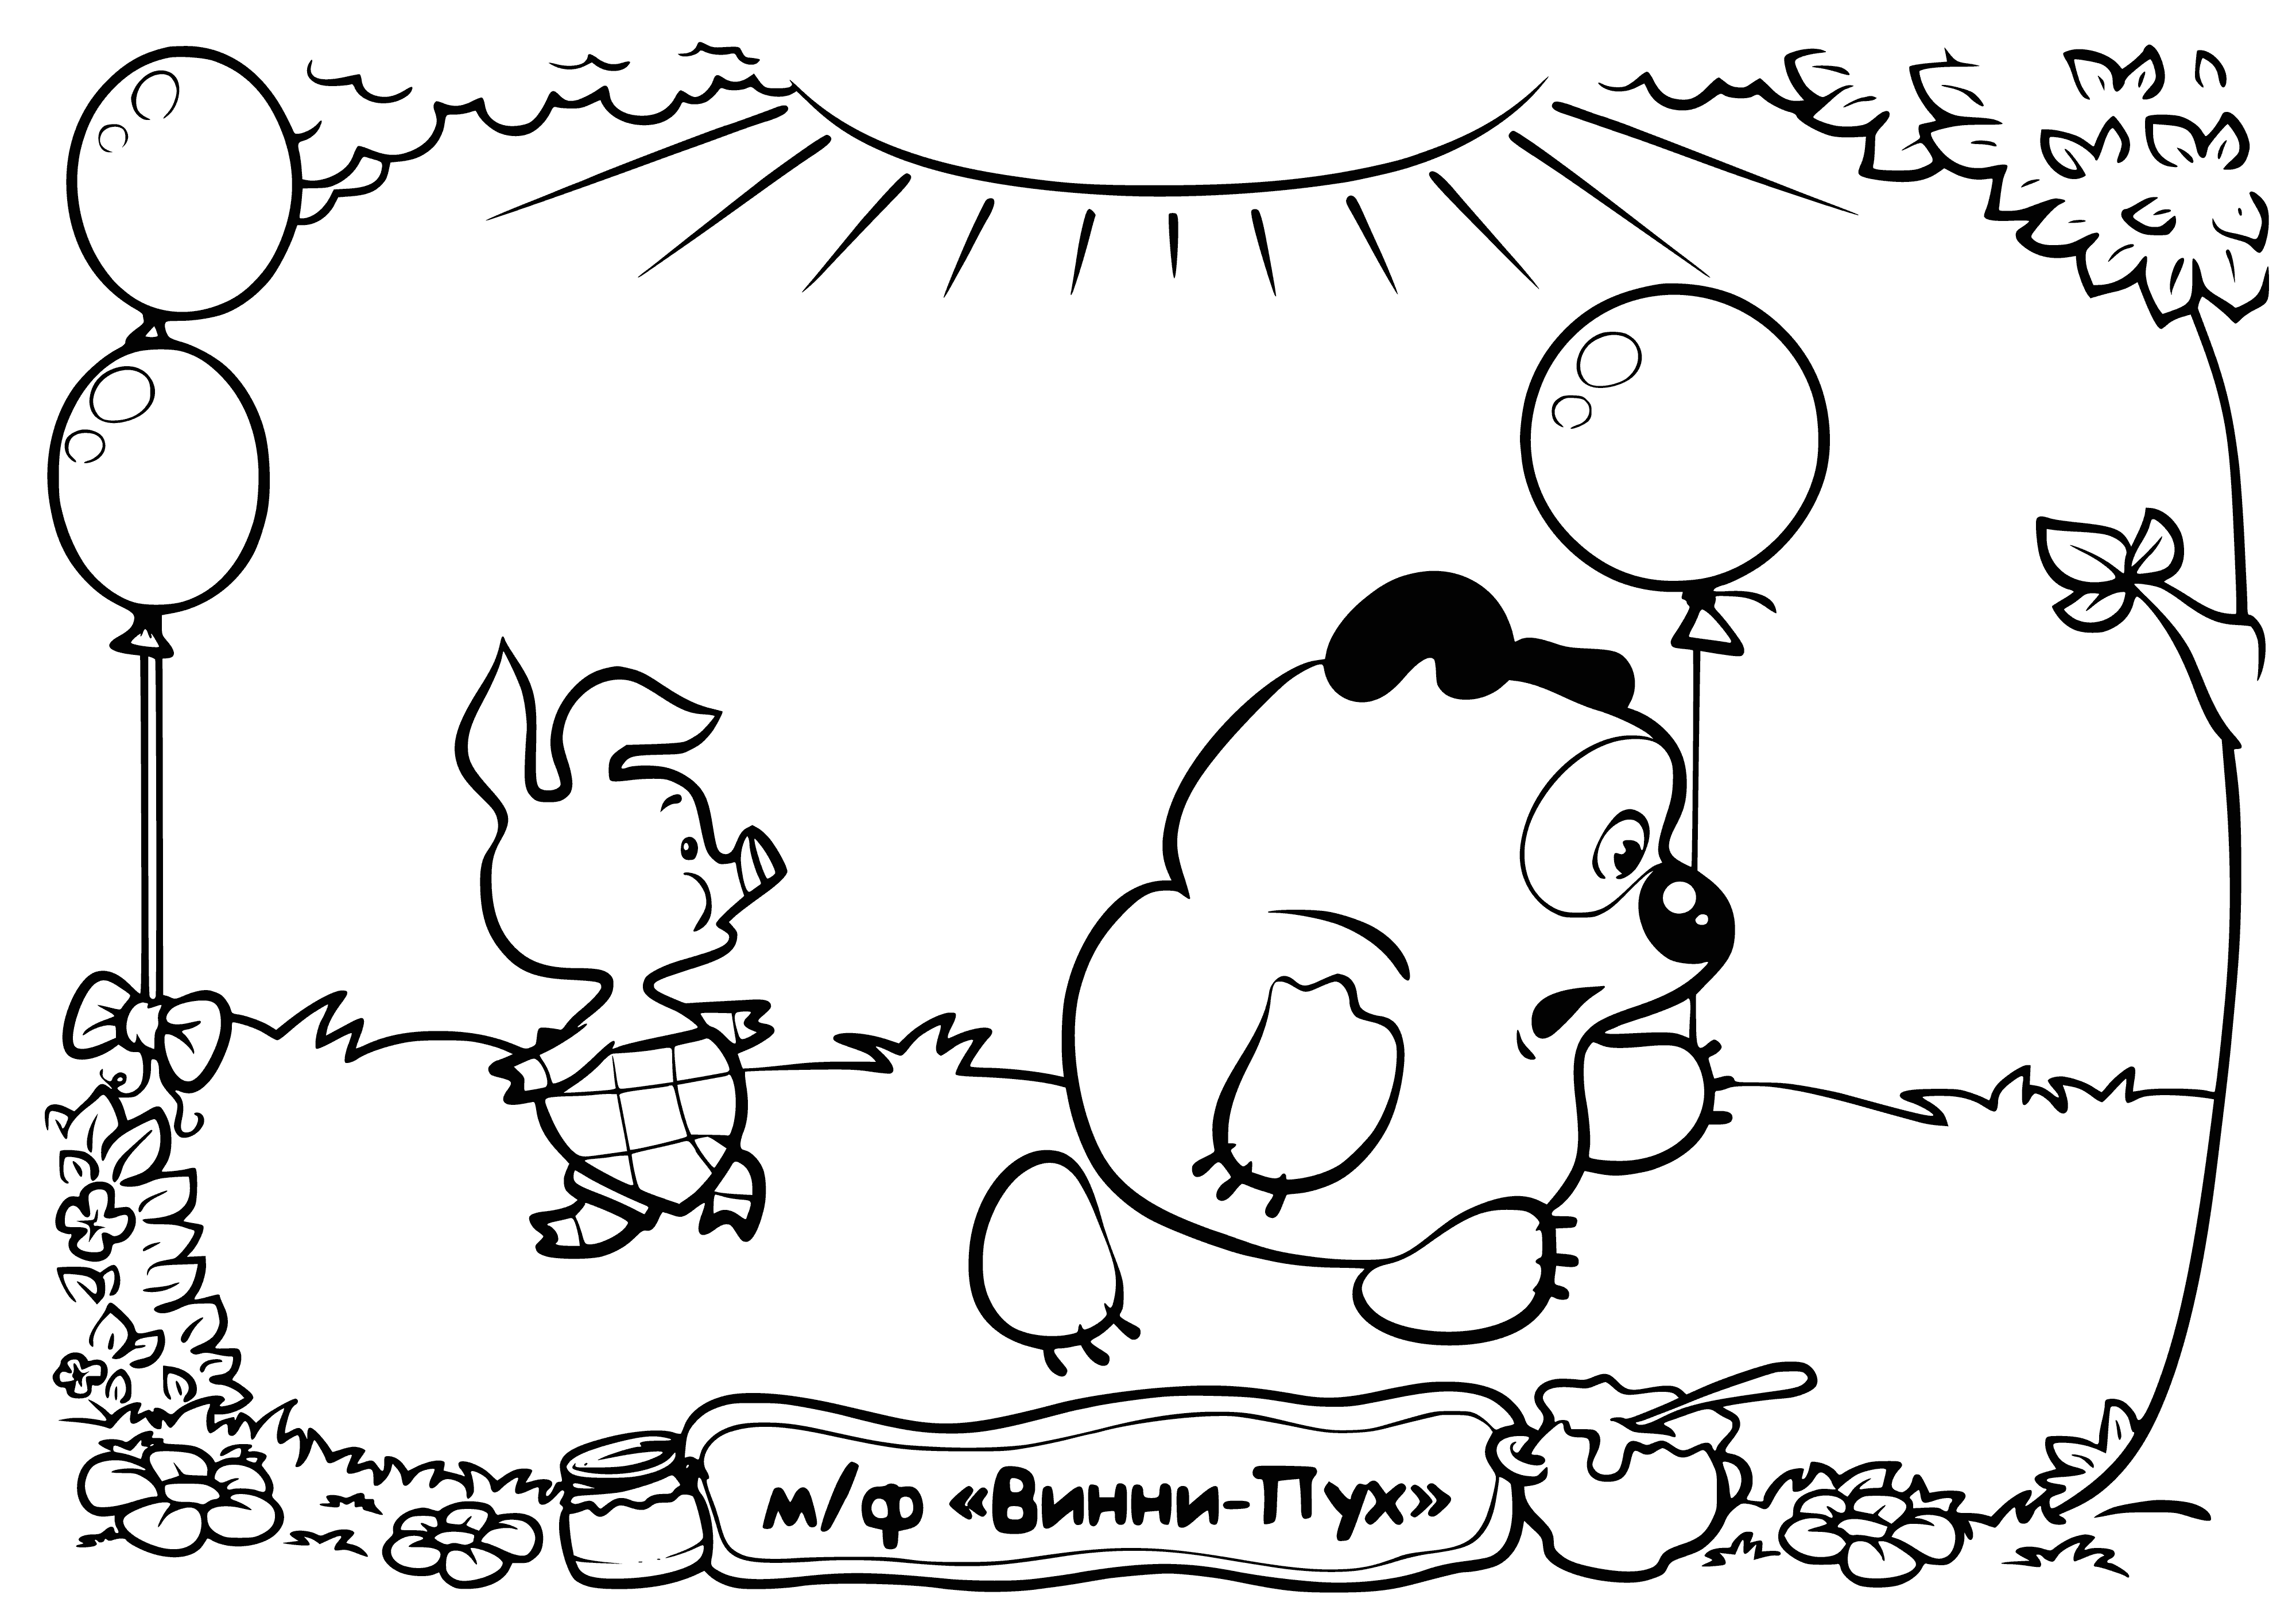 coloring page: Bear & pig sit together; bear has happy expression,pig looks worried.